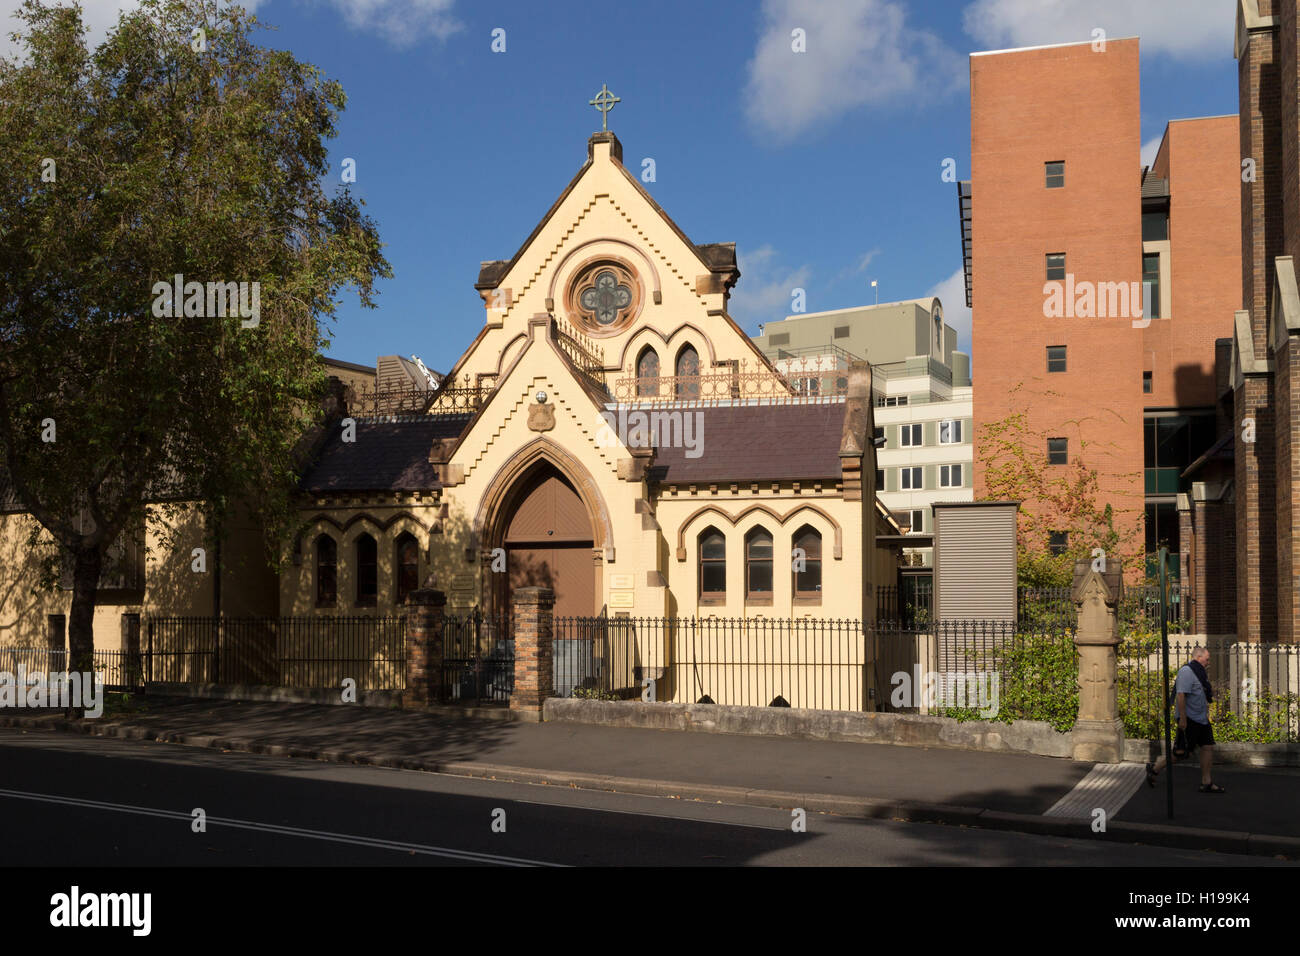 The site of the first electric carillon in any Catholic church in Australia Darlinghurst Sydney Australia Stock Photo